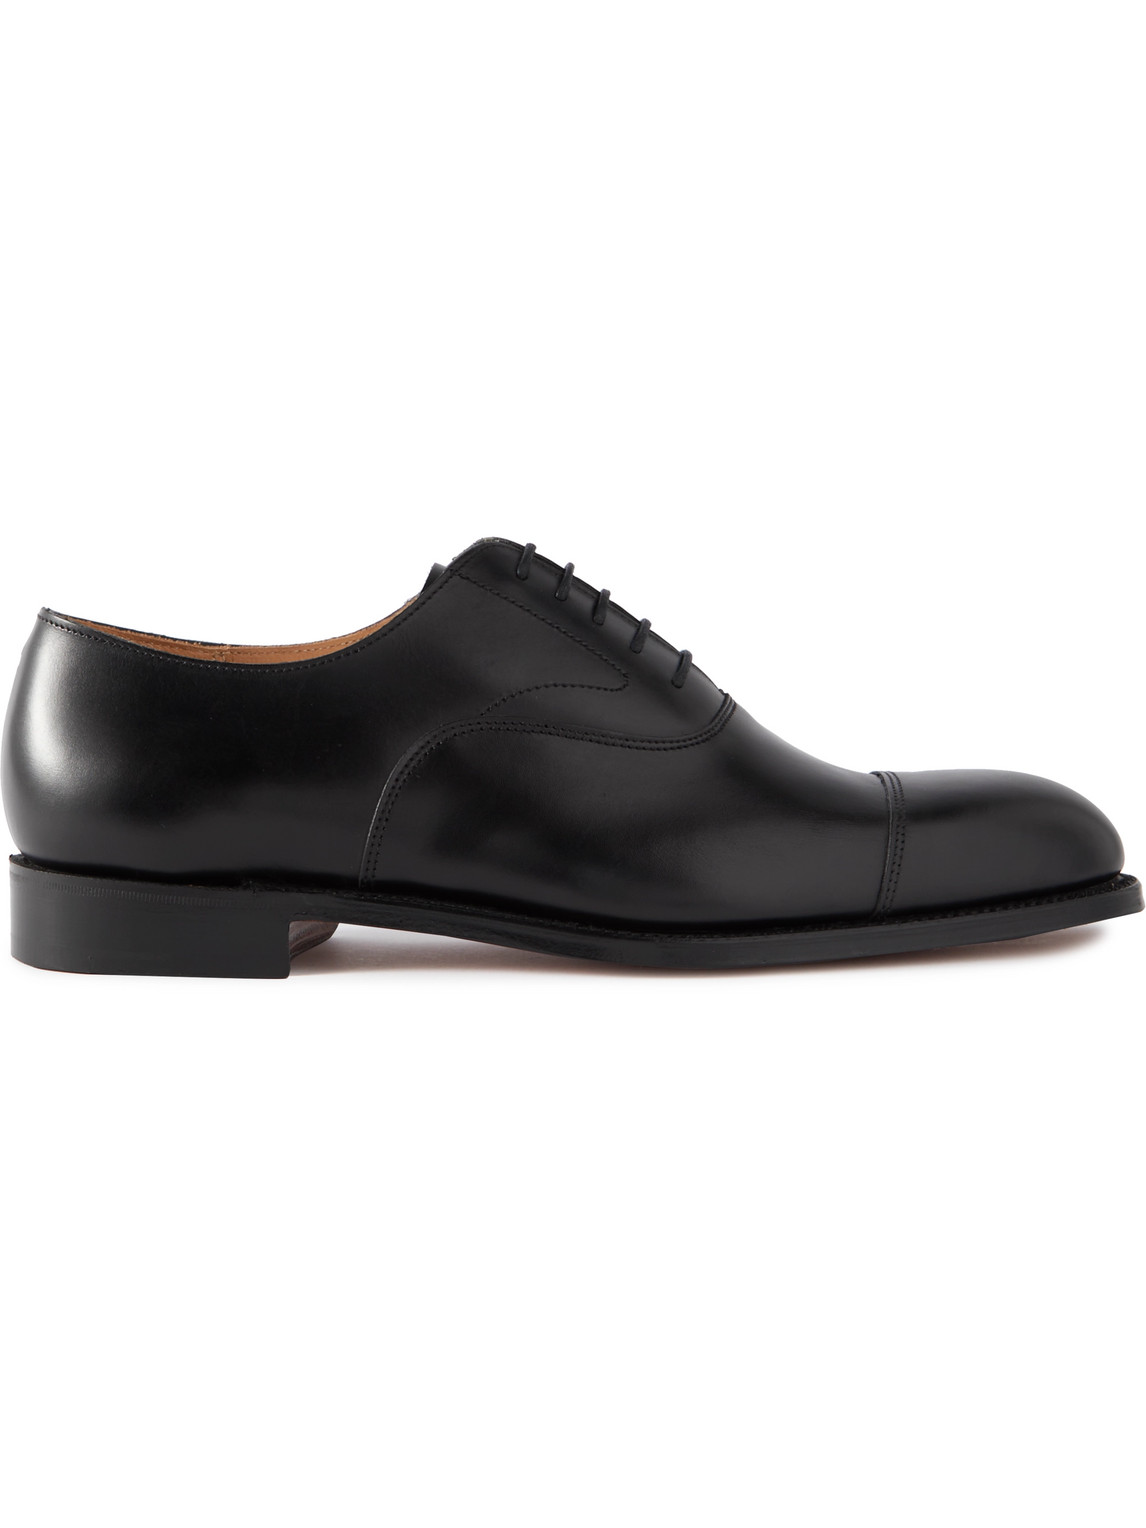 Grenson Cambridge Leather Oxford Shoes In Black